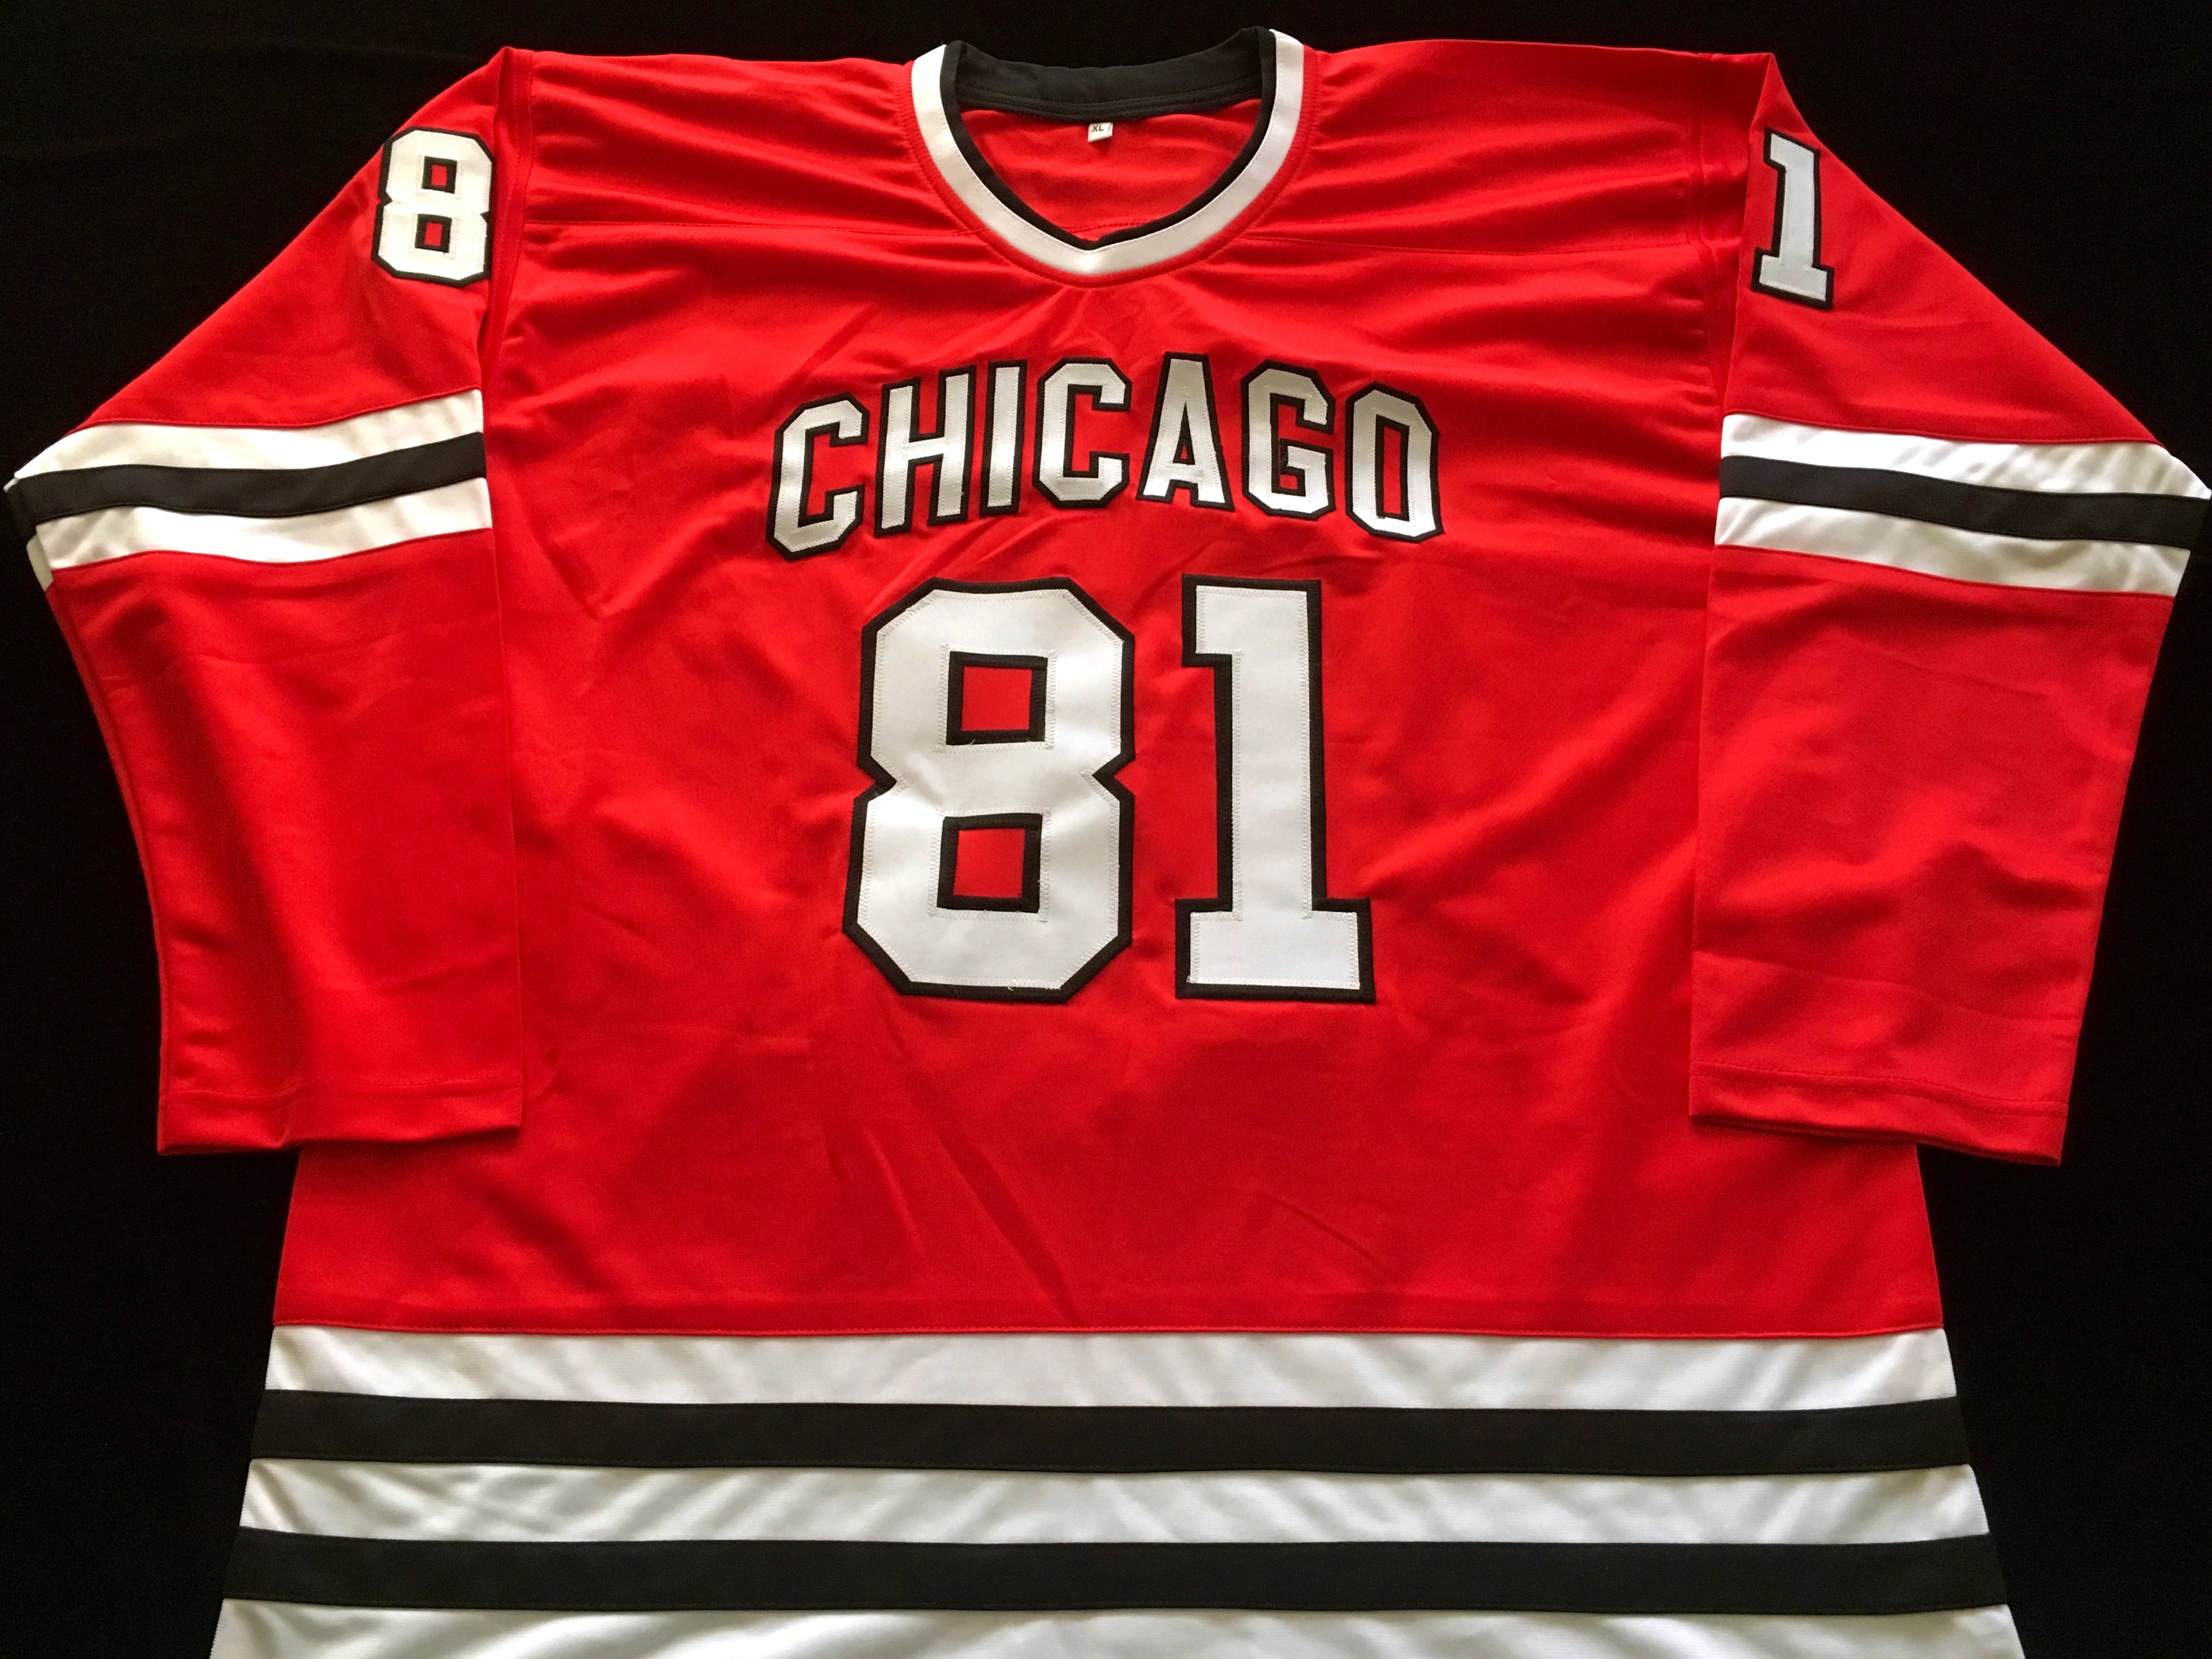 Chris Chelios Chicago #7 Autographed Red Hockey Jersey